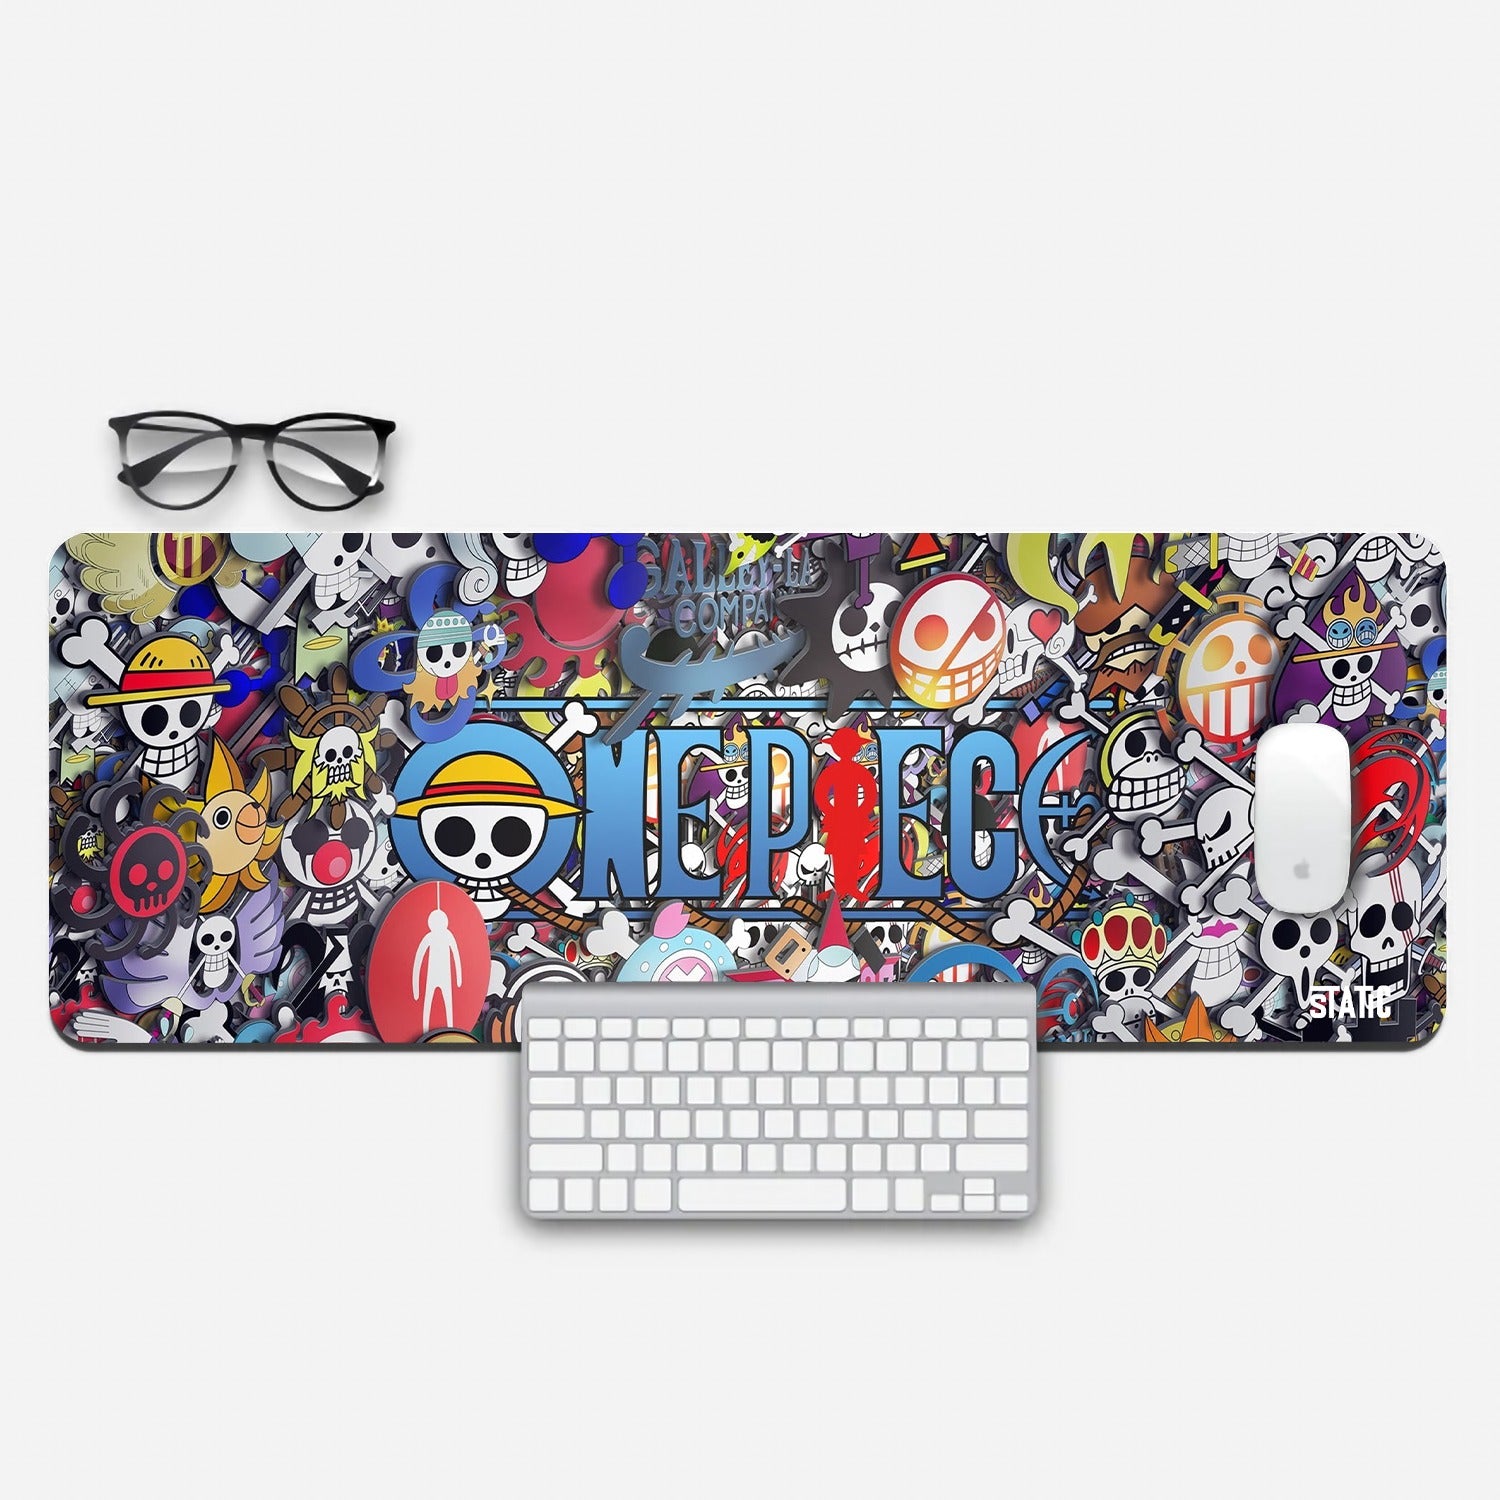 Dive into the thrilling world of One Piece with our Extended Gaming Mouse Pad. Featuring a captivating collage of all the iconic Jolly Rogers from the series encircling the legendary title, this mouse pad adds a touch of pirate adventure to your gaming setup. Crafted for precision and durability, it ensures smooth and responsive gameplay. Join the Straw Hat Pirates and embark on epic gaming quests. Order yours today!